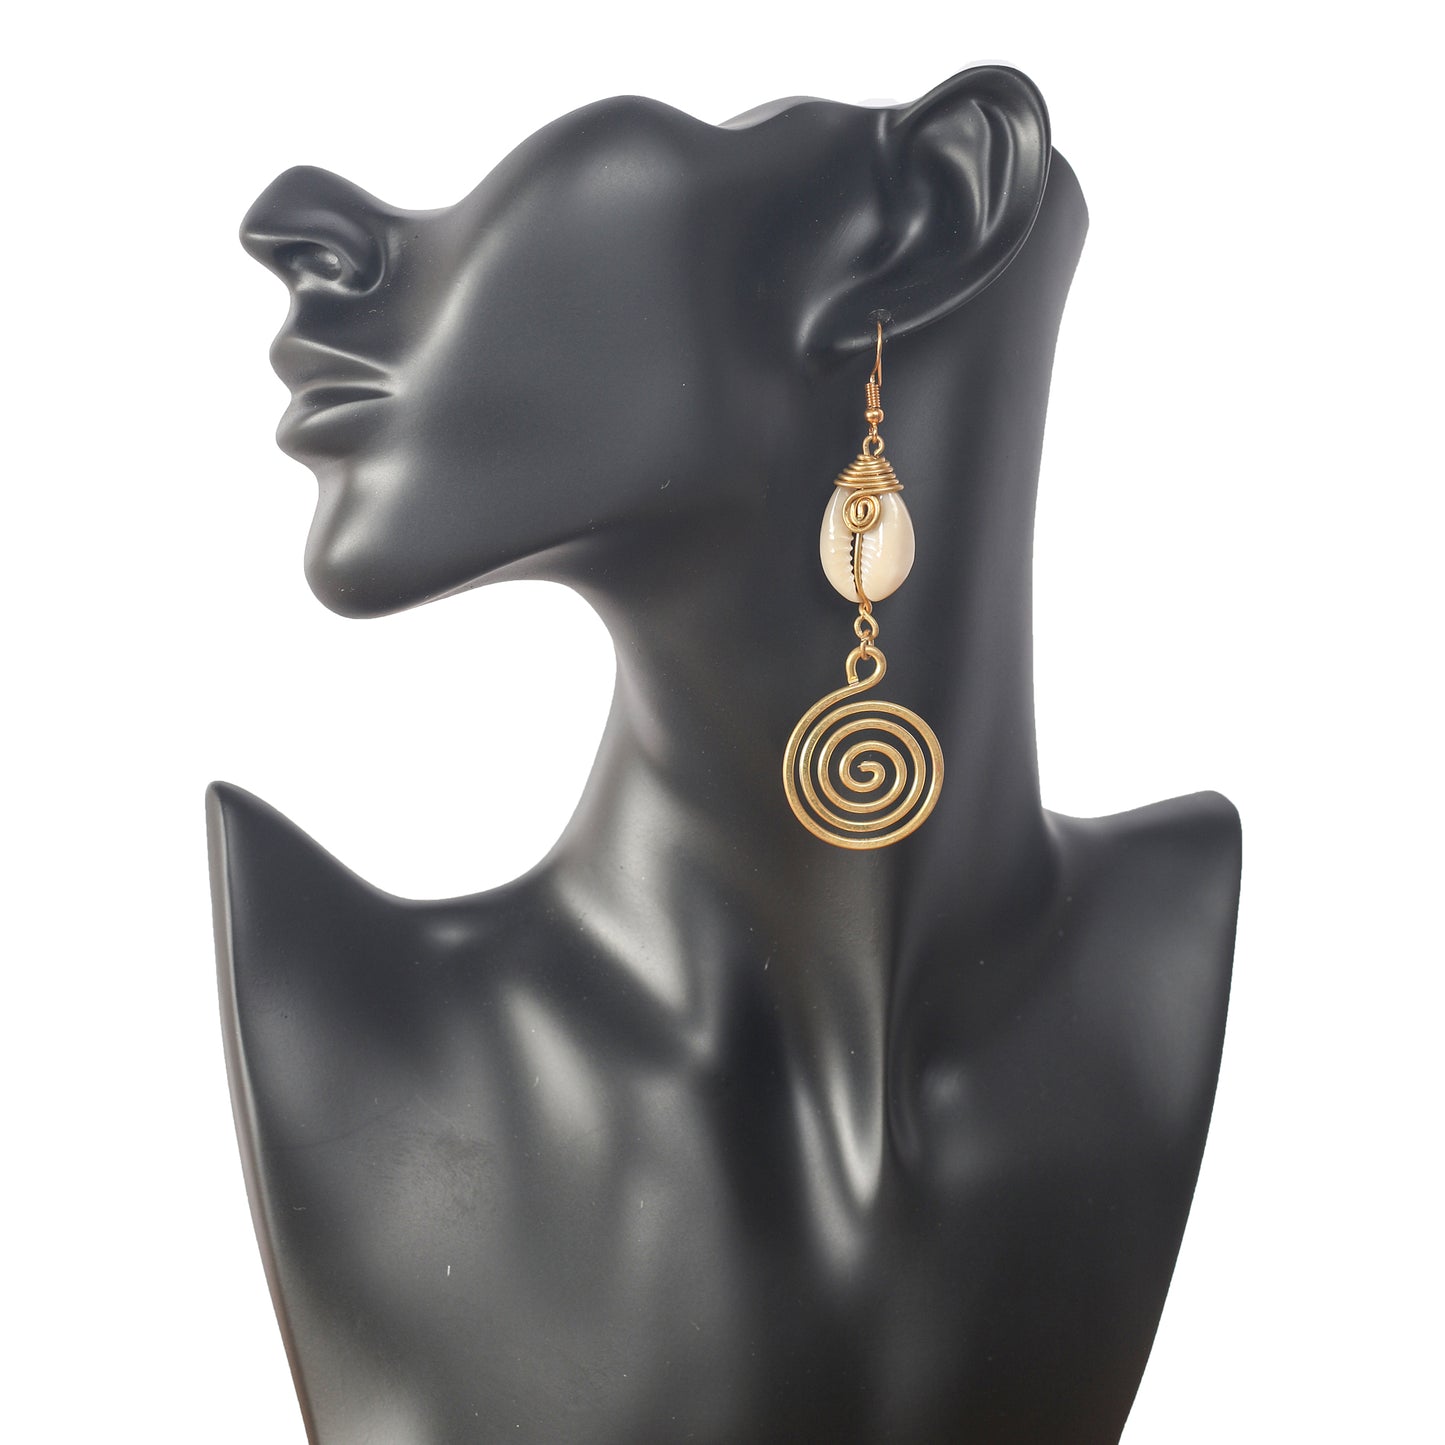 Spiral Earrings handmade with gold plated brass and cowrie shell.